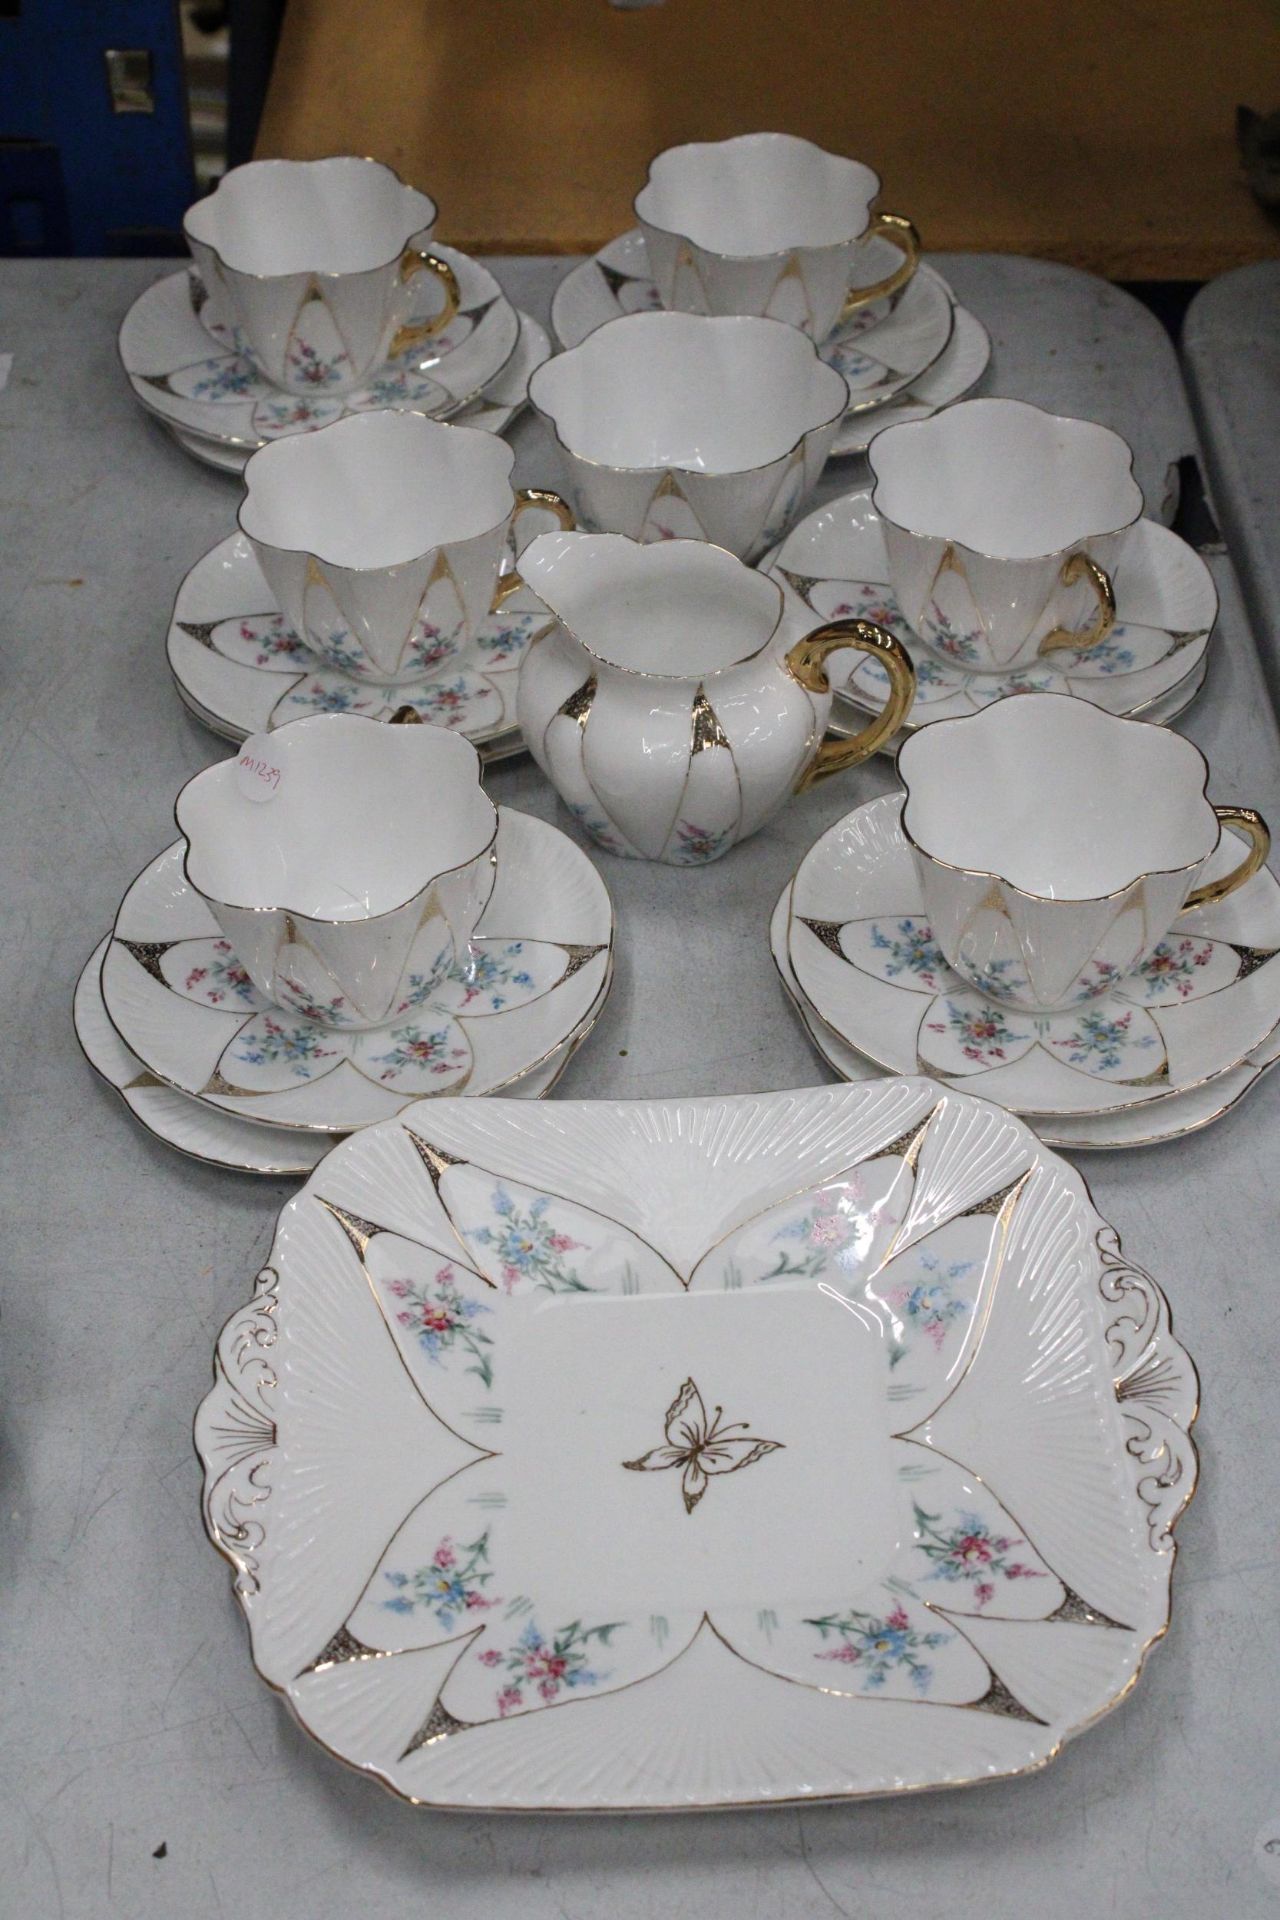 A VINTAGE SHELLEY HANDPAINTED DAINTY SHAPE TEACUPS AND SAUCERS TO INCLUDE SUGAR, CREAMER, CAKE/BREAD